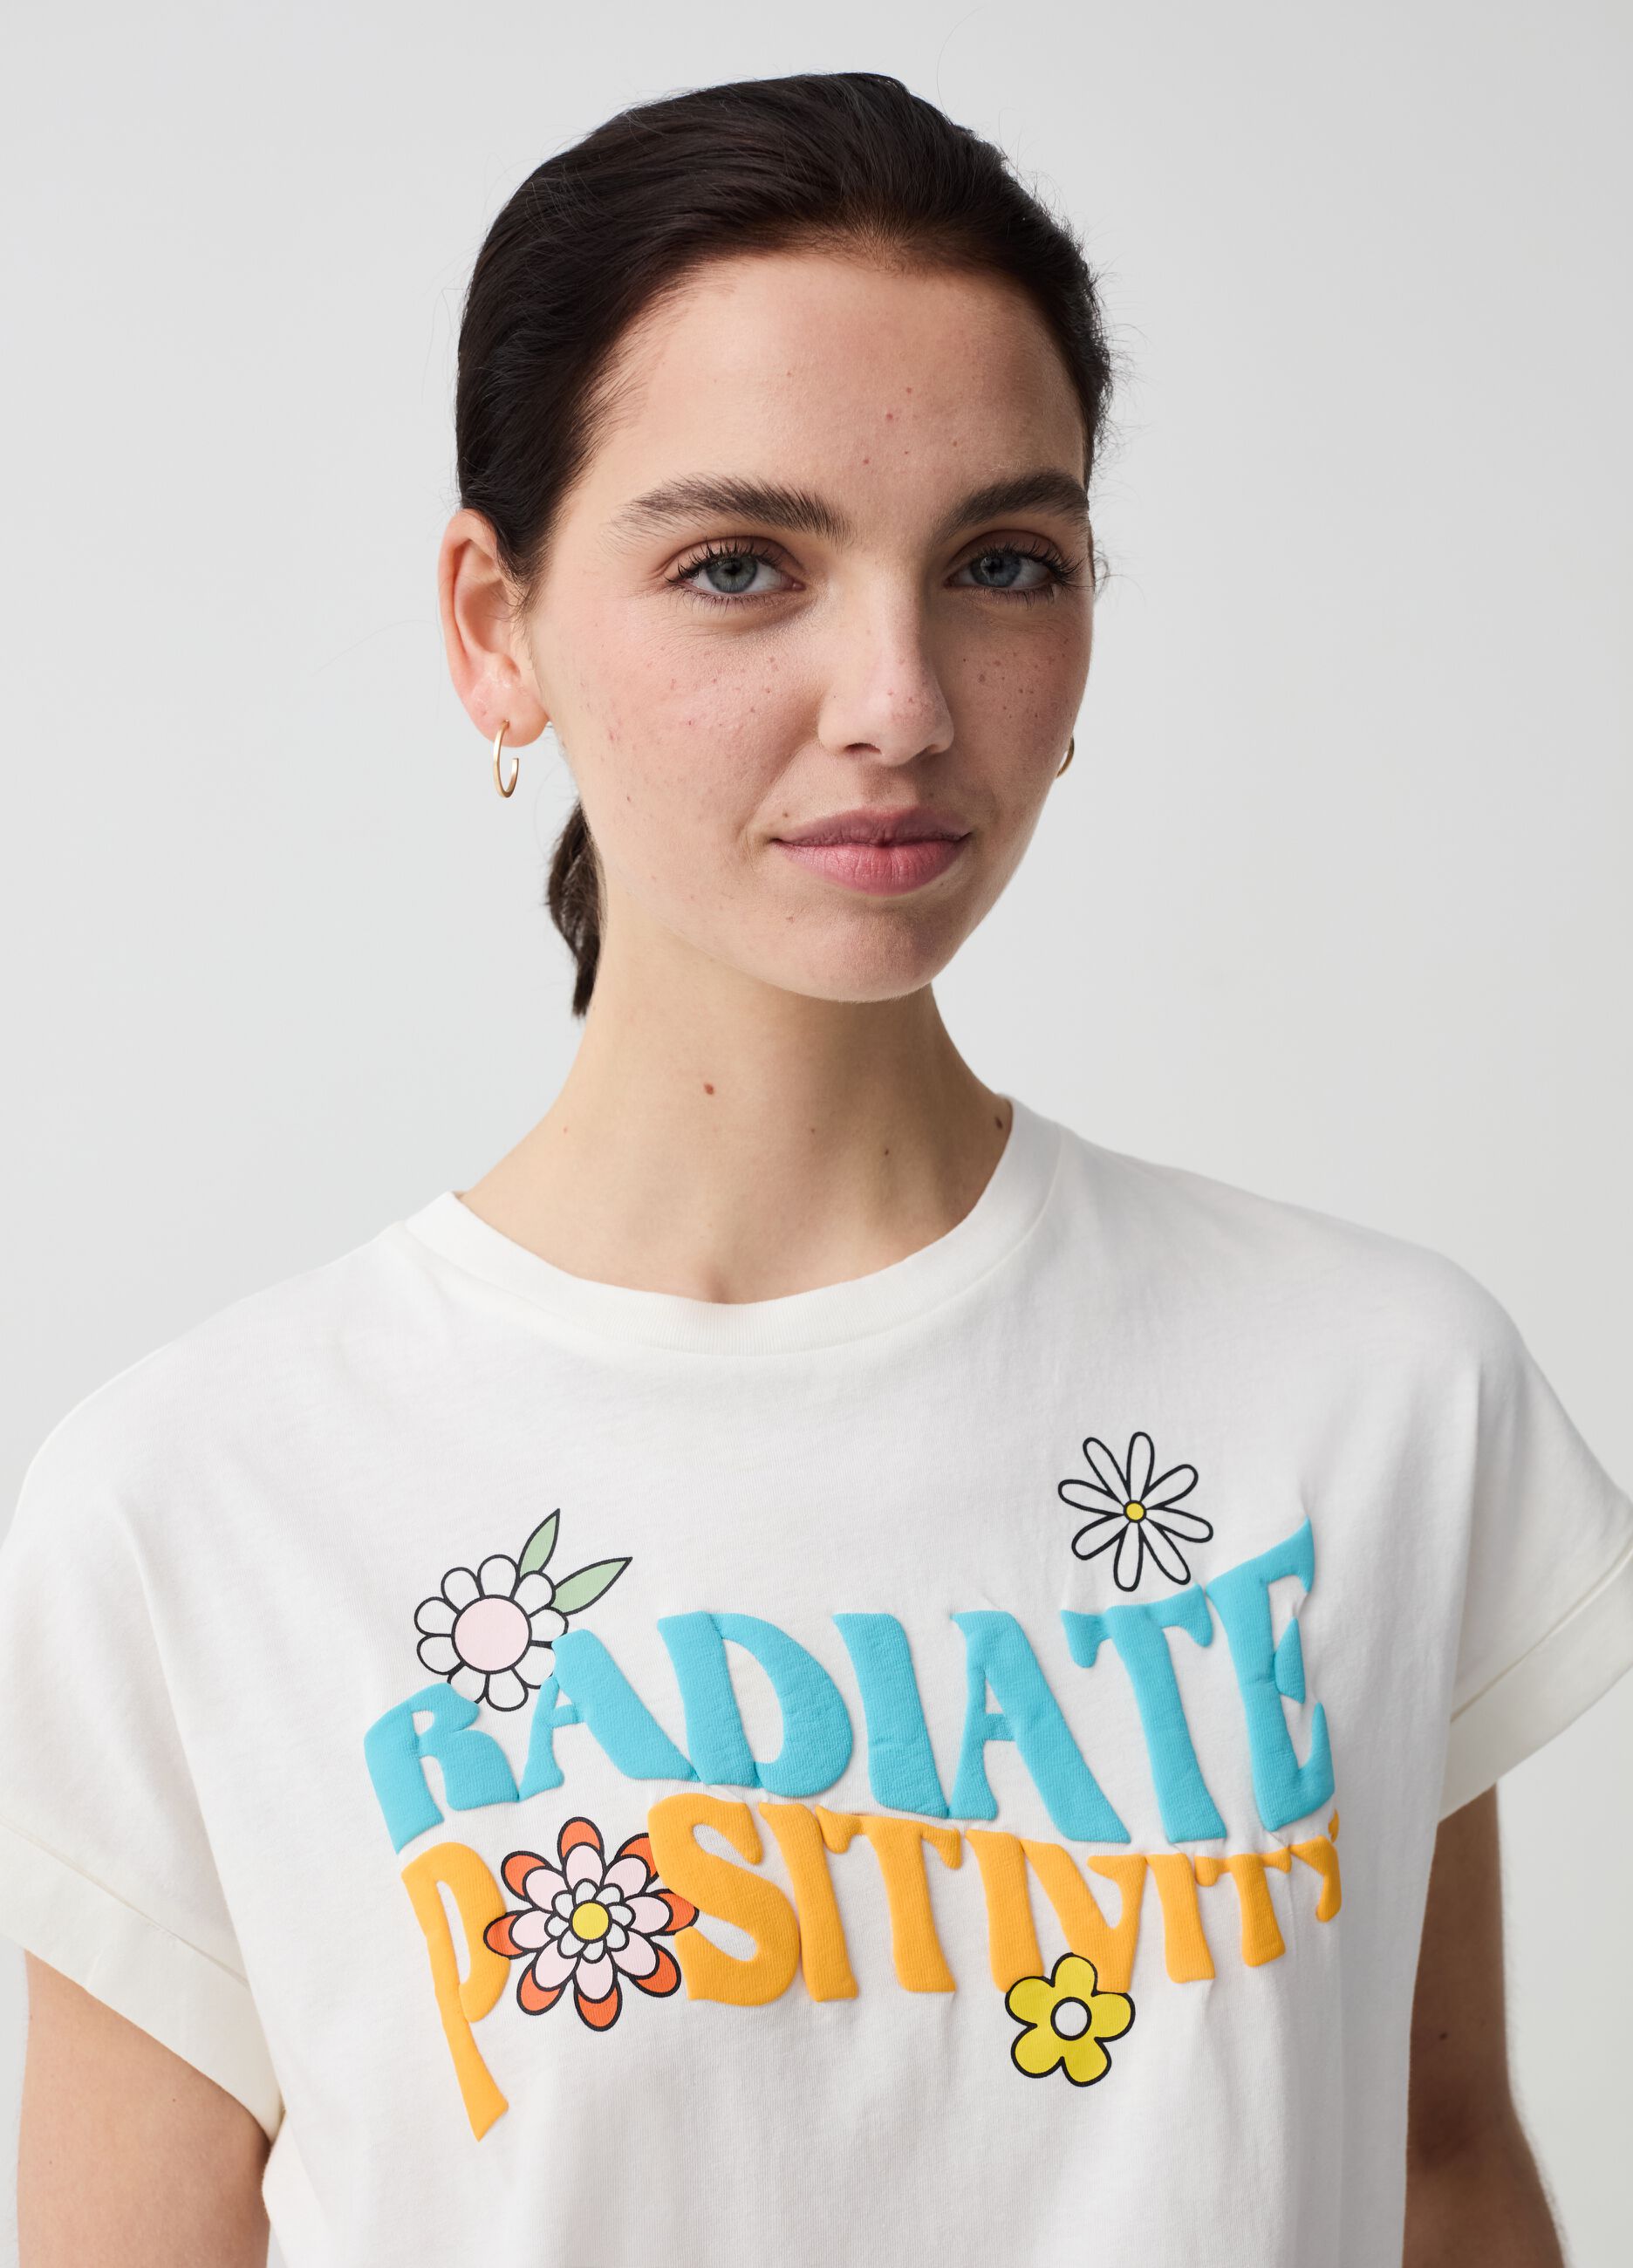 T-shirt with printed lettering and flowers